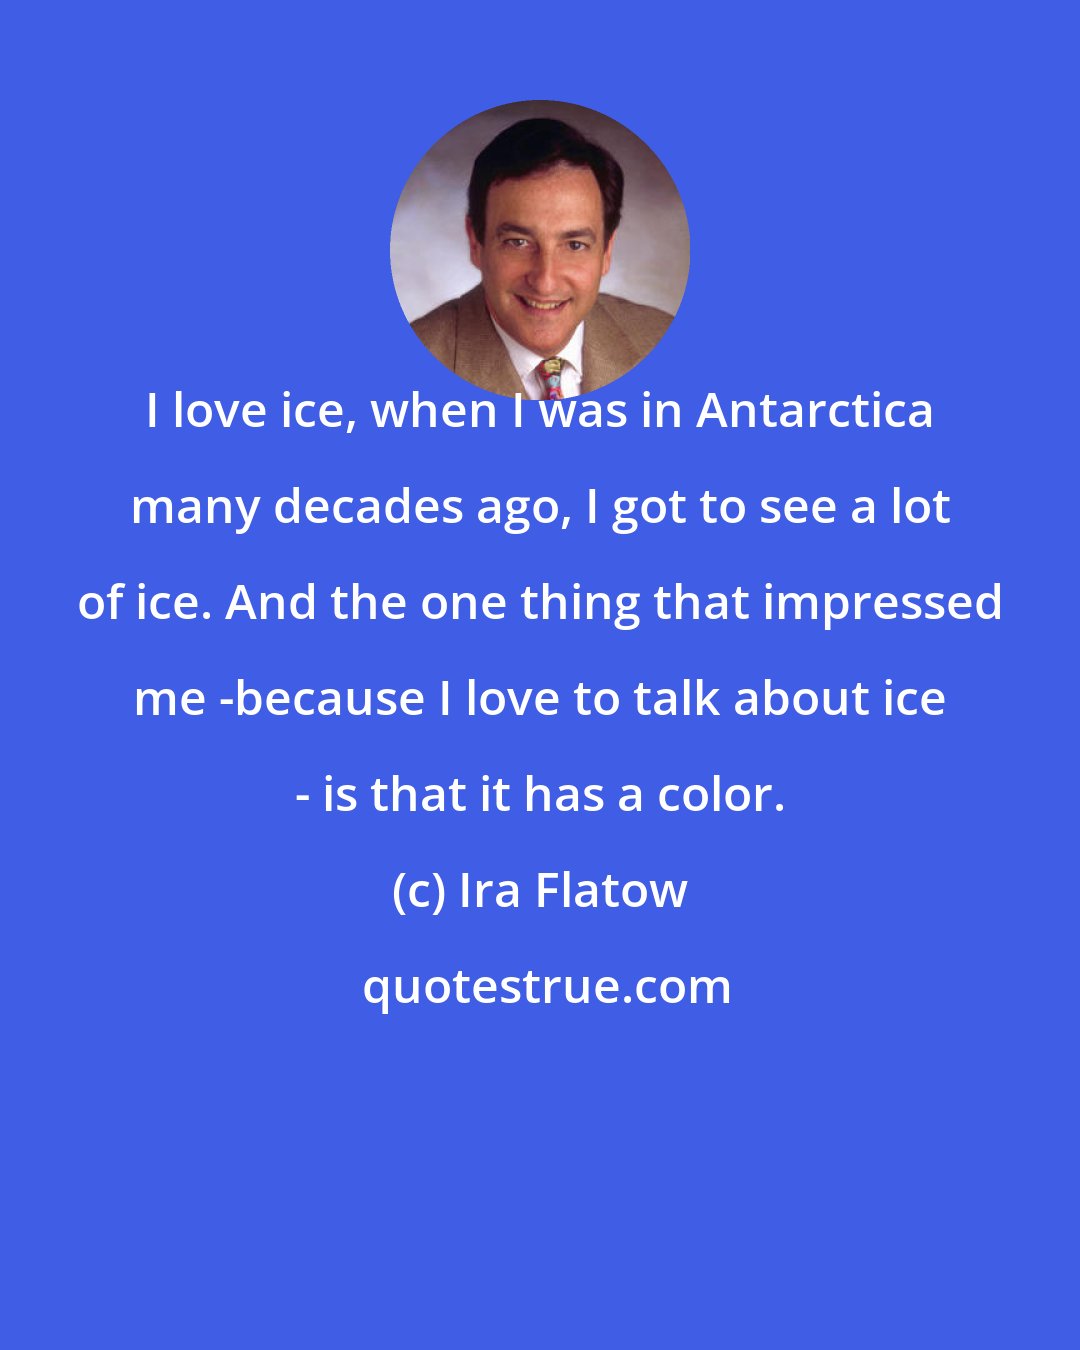 Ira Flatow: I love ice, when I was in Antarctica many decades ago, I got to see a lot of ice. And the one thing that impressed me -because I love to talk about ice - is that it has a color.